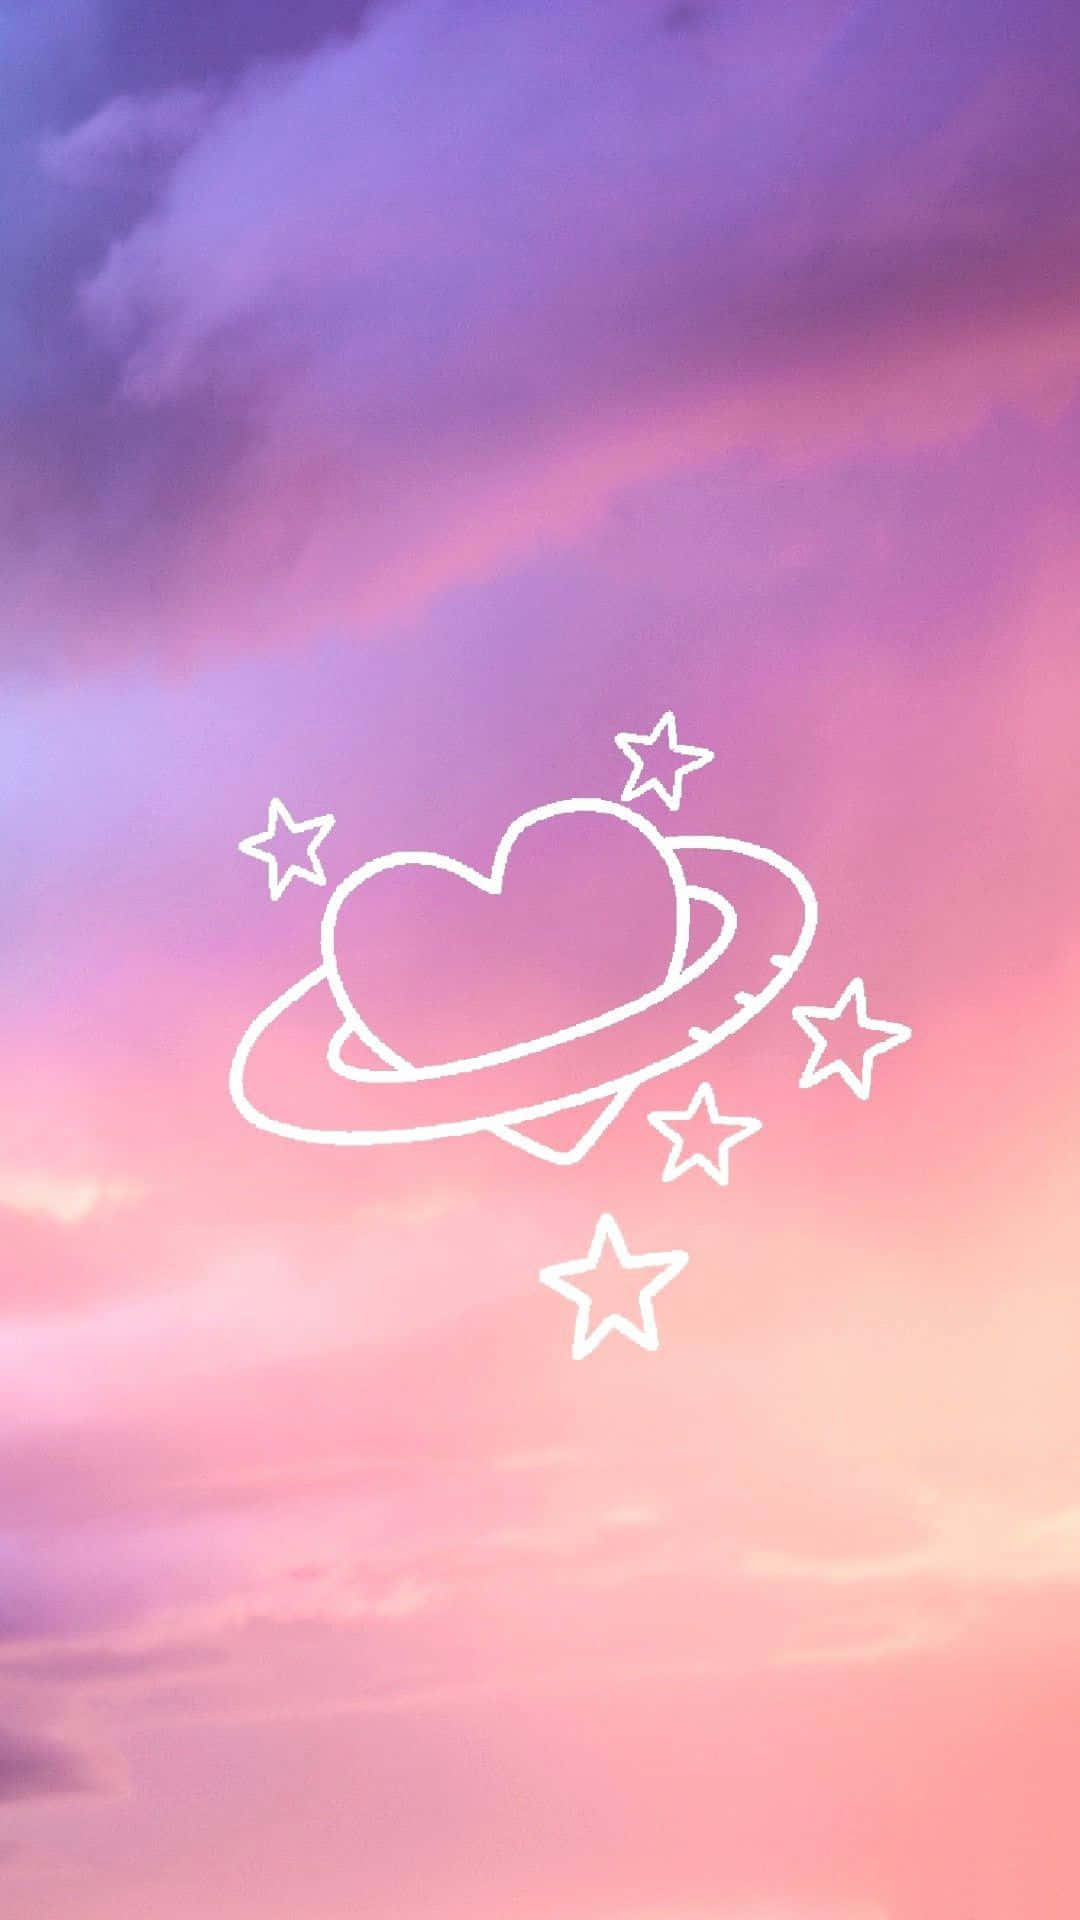 Add Some Pretty Pink To Your Day With This Girly Aesthetic Background